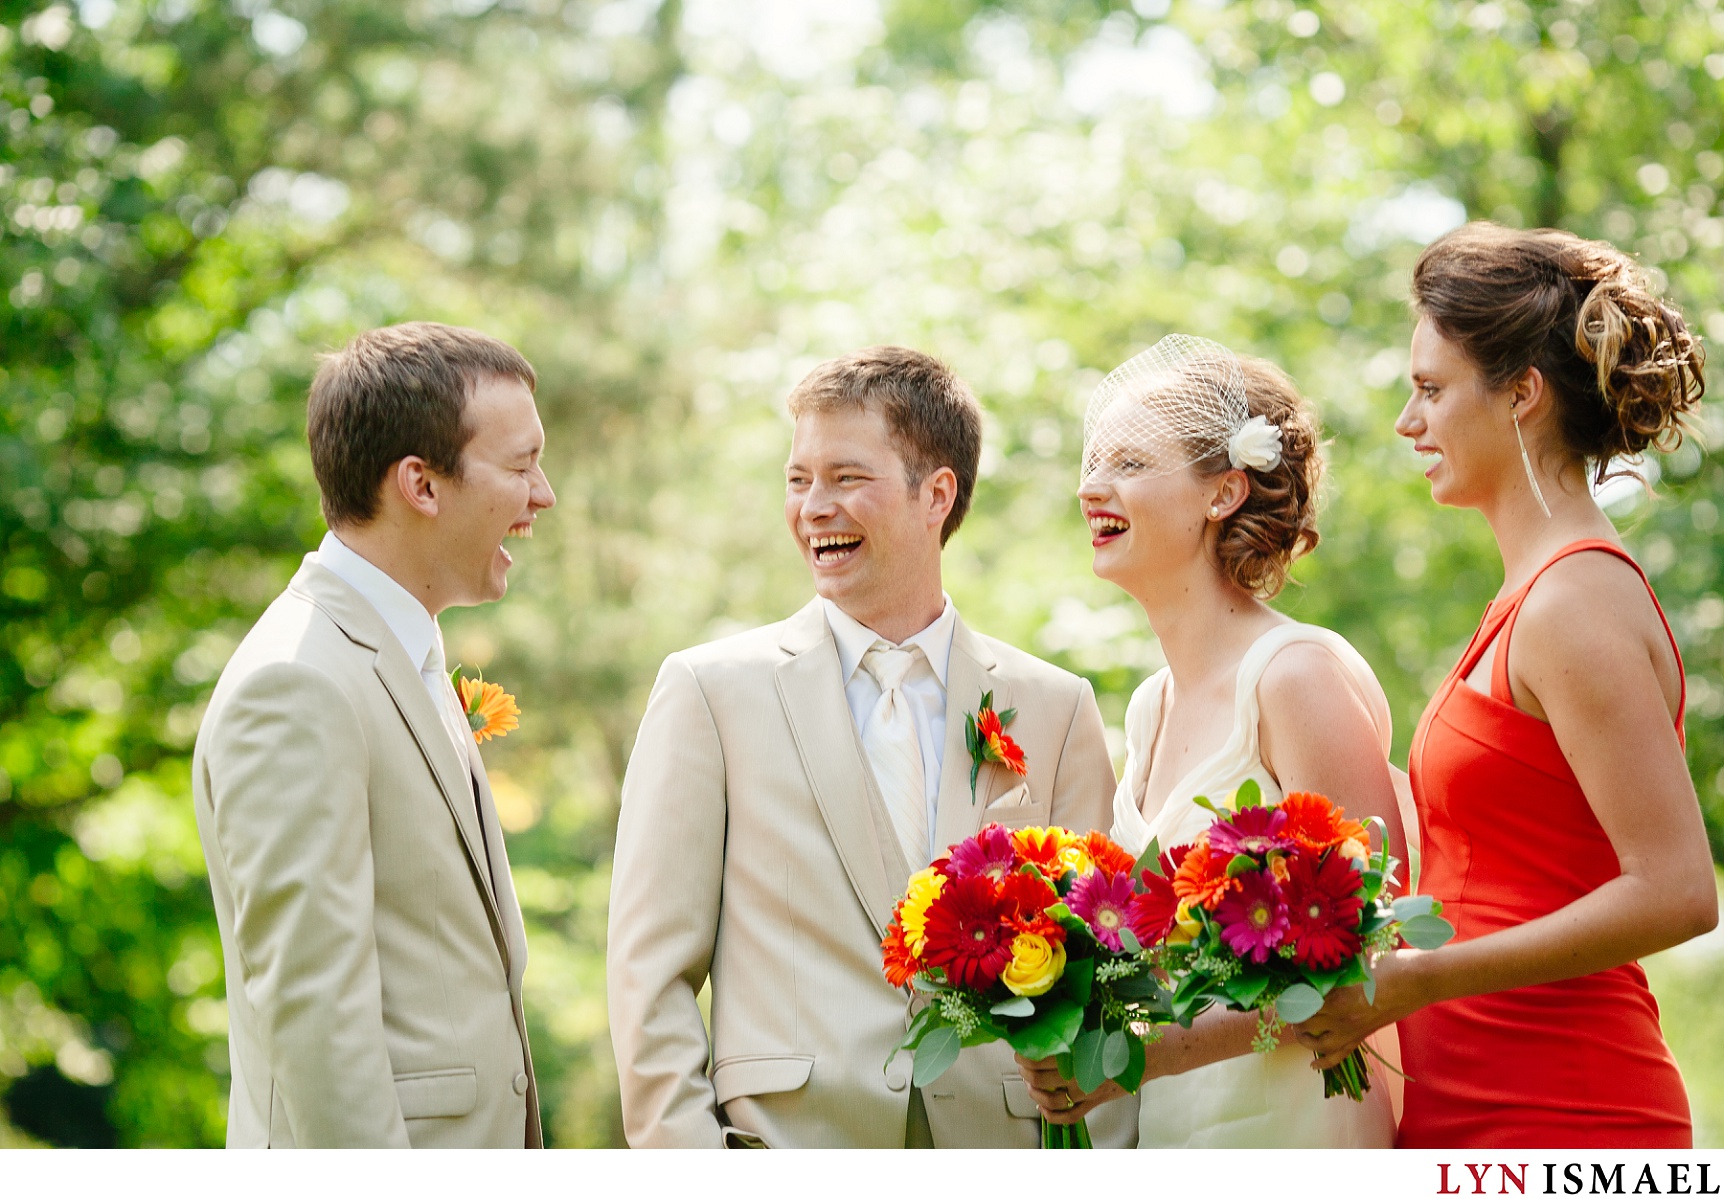 A candid moment with the wedding party at a Belwood Lake wedding.